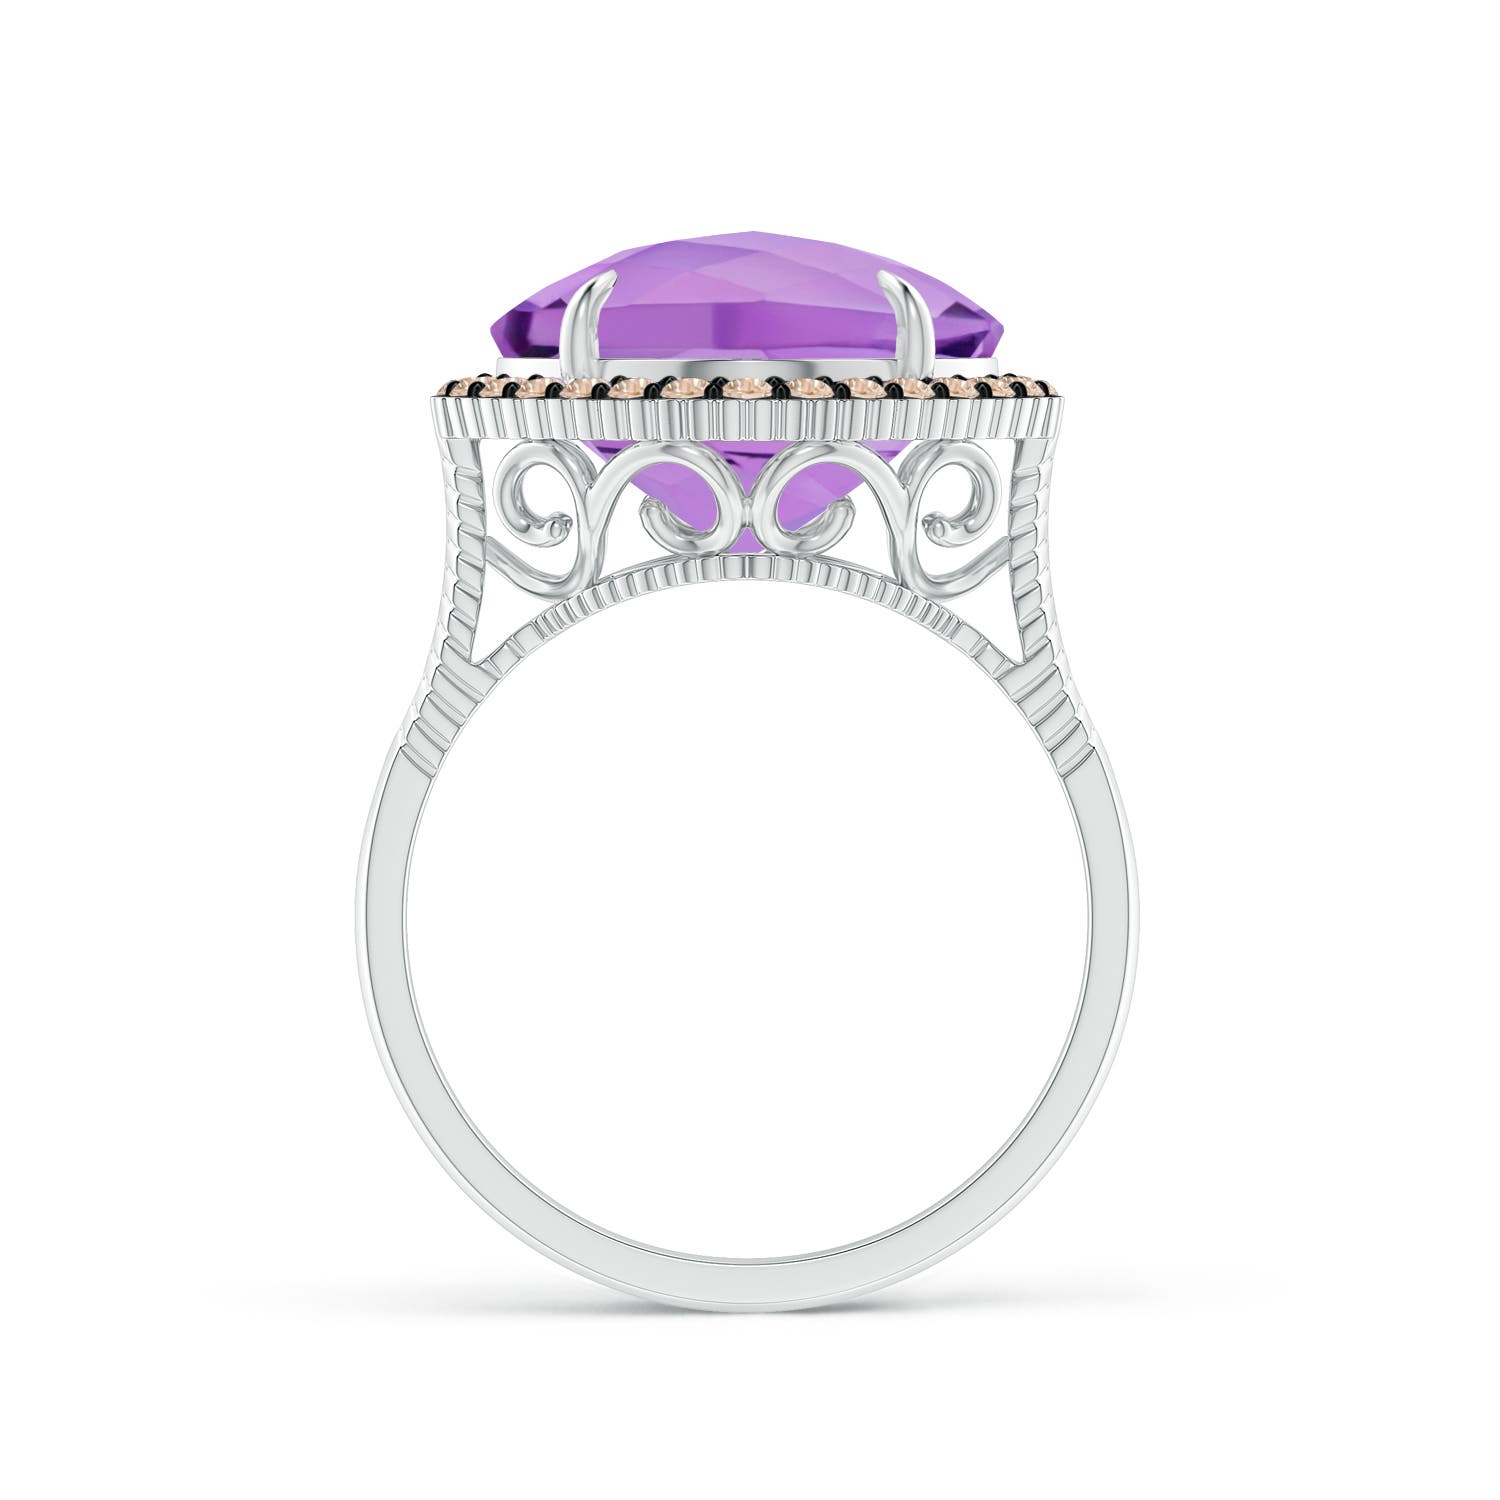 A - Amethyst / 4.98 CT / 14 KT White Gold